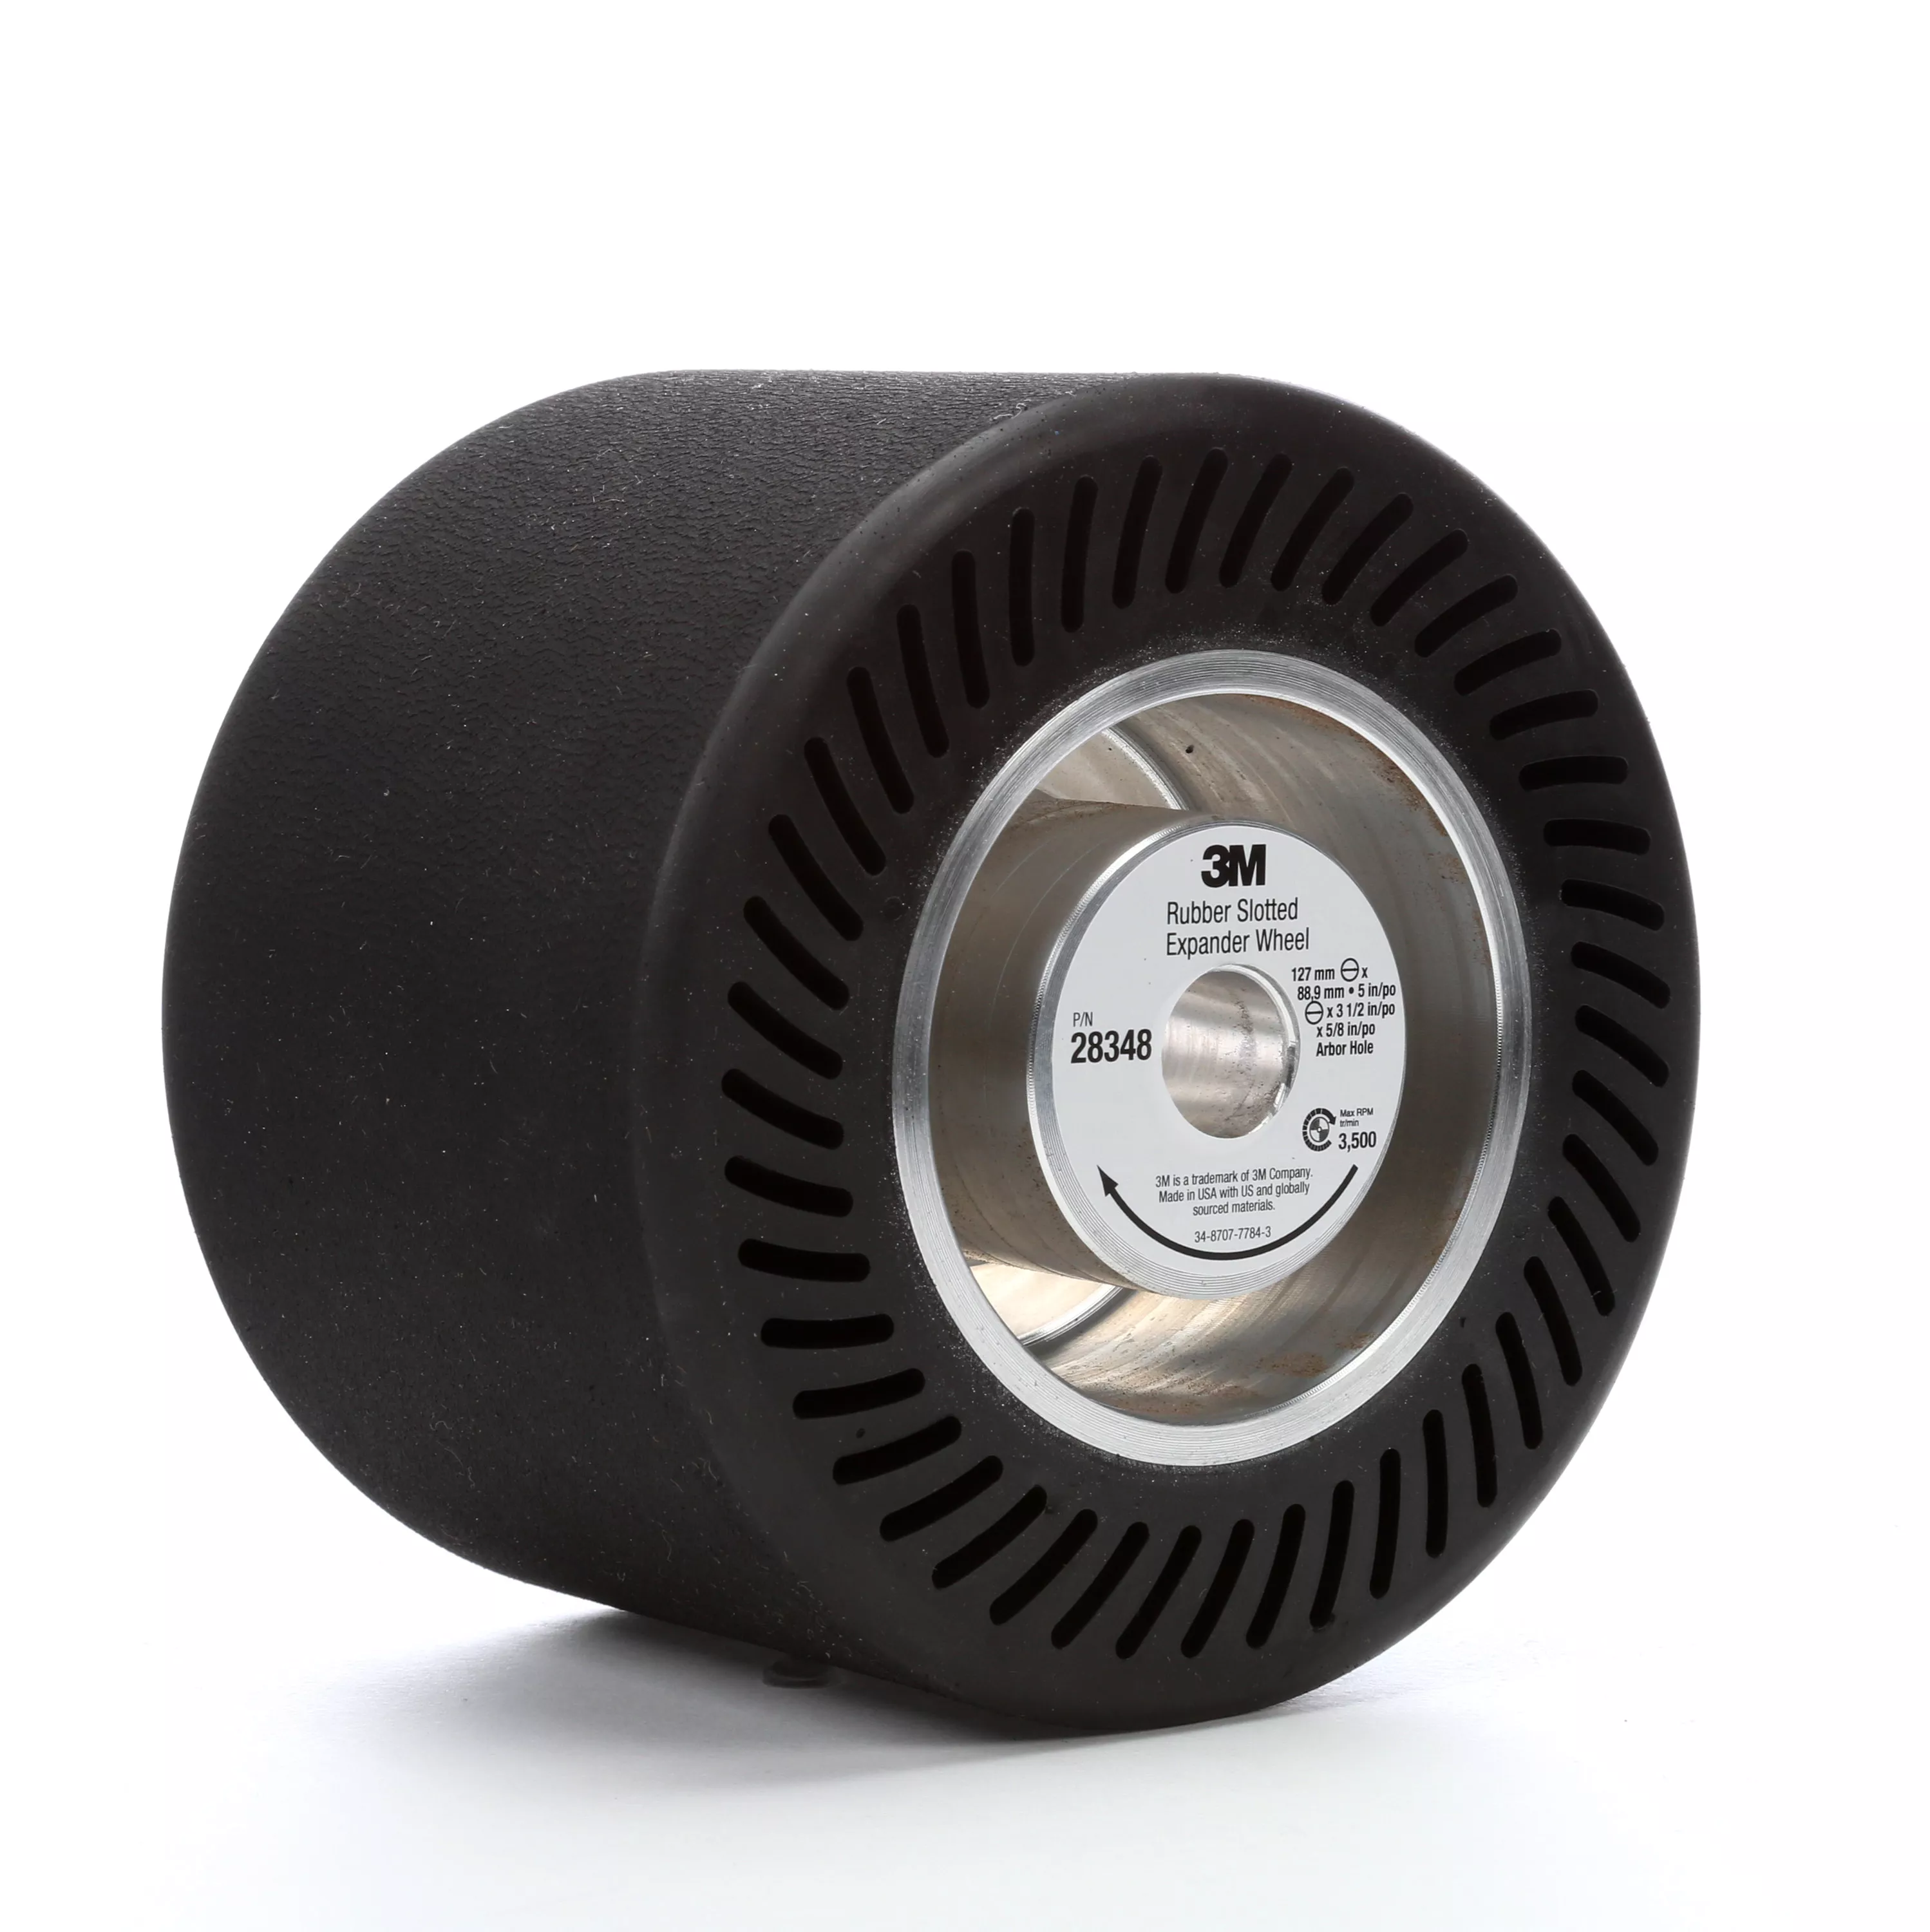 3M™ Rubber Slotted Expander Wheel 28348, 5 in x 3-1/2 in 5/8 in Arbor
Hole, 1 ea/Case